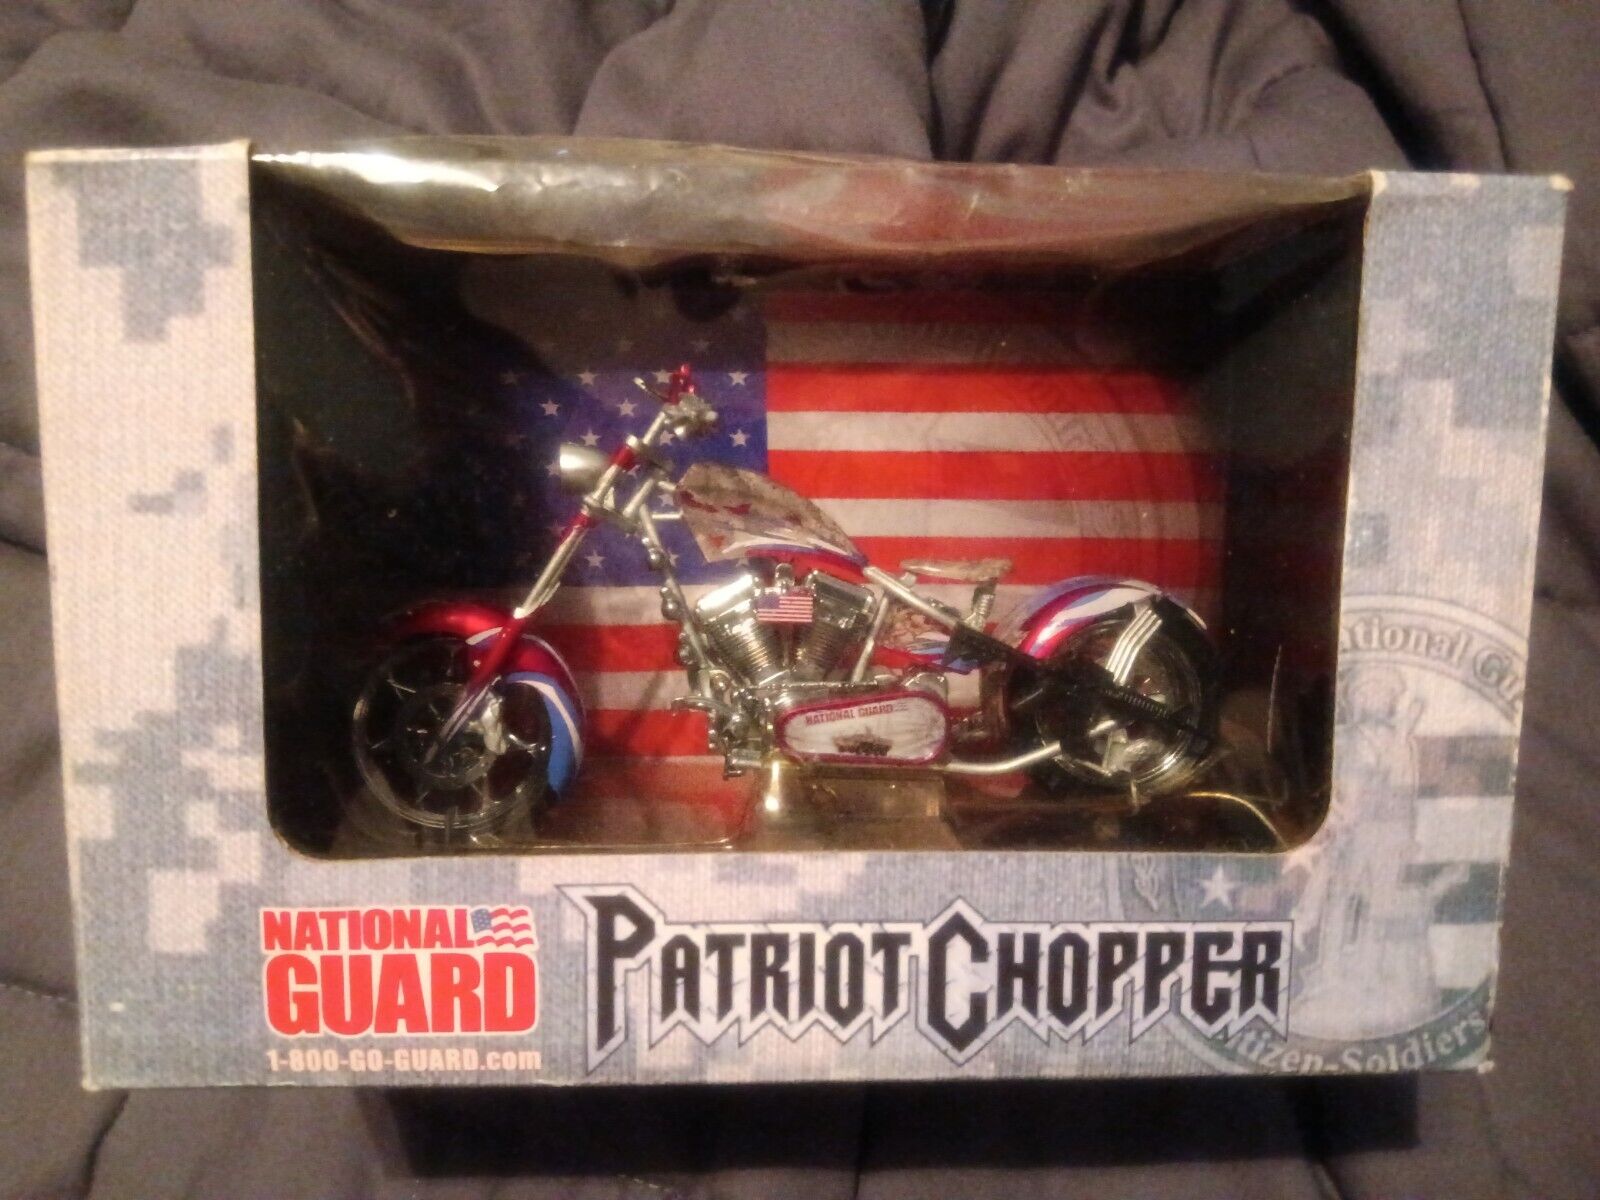 RARE Patriot Chopper Motorcycle Collectible 1:18 Scale National Guard New 2008